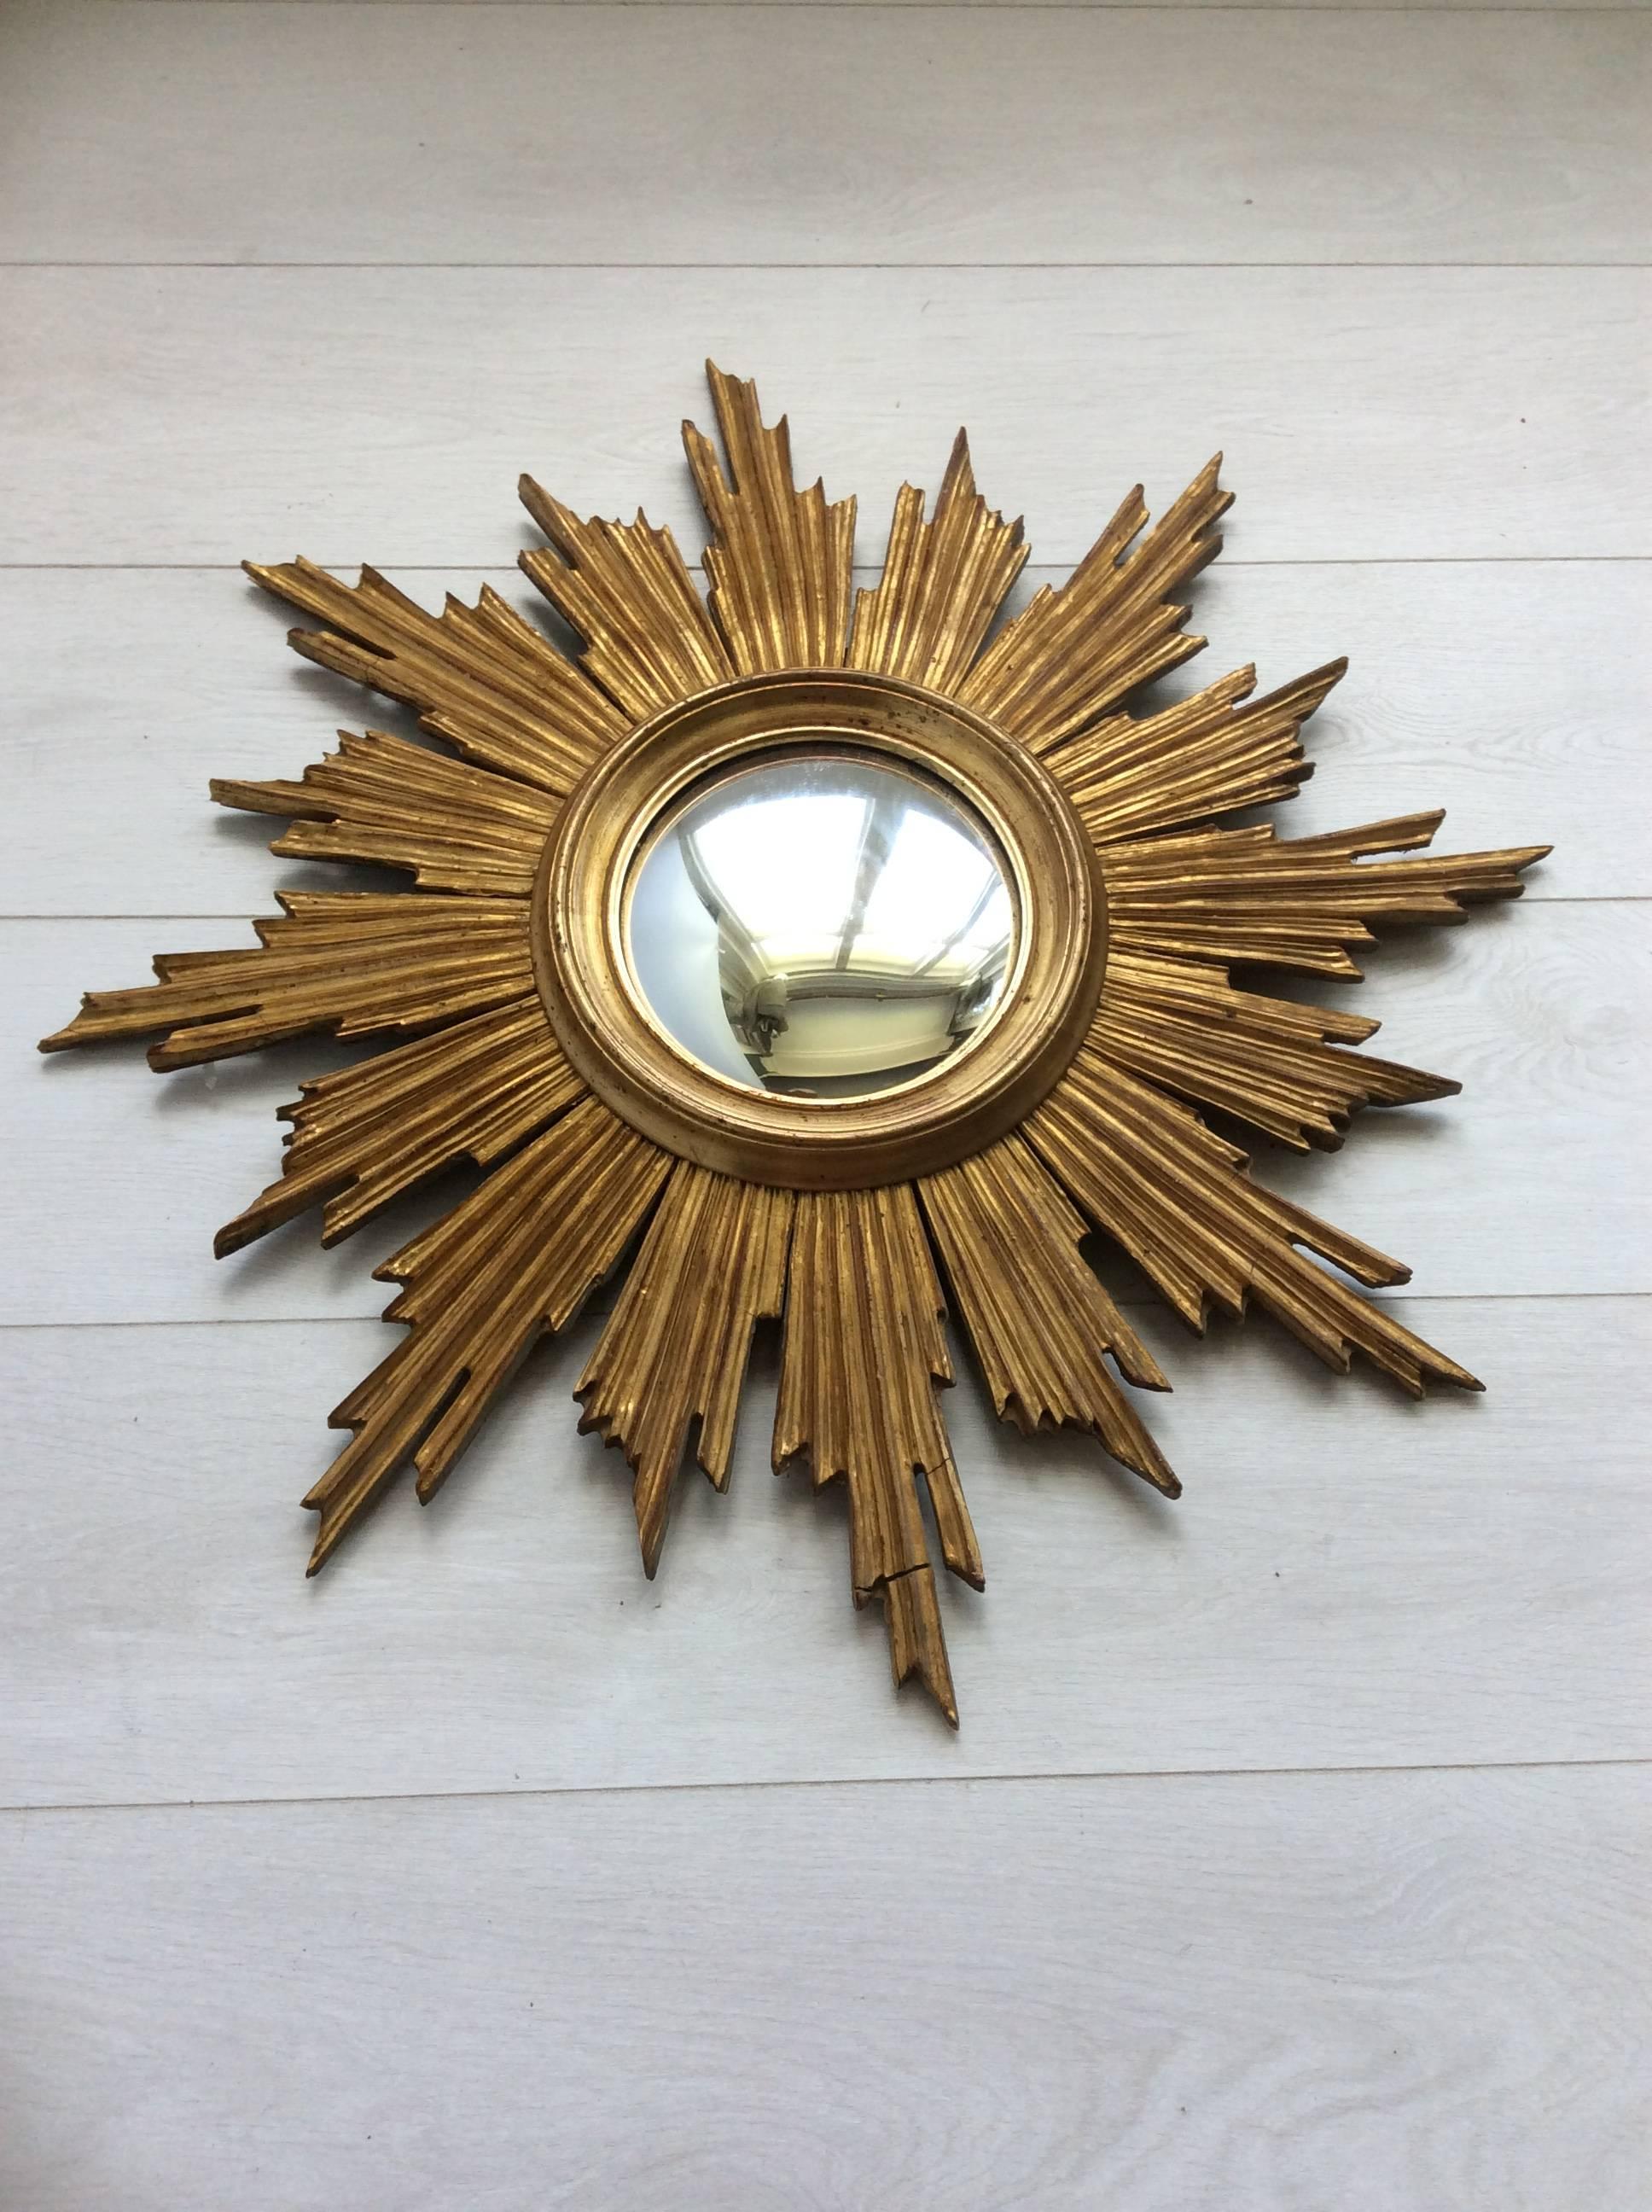 Beautiful coloring and patination to this giltwood sunburst mirror.

With original convex glass.

Some cracks to a couple of rays but still intact, please see close up images

Measures: 72cm across.